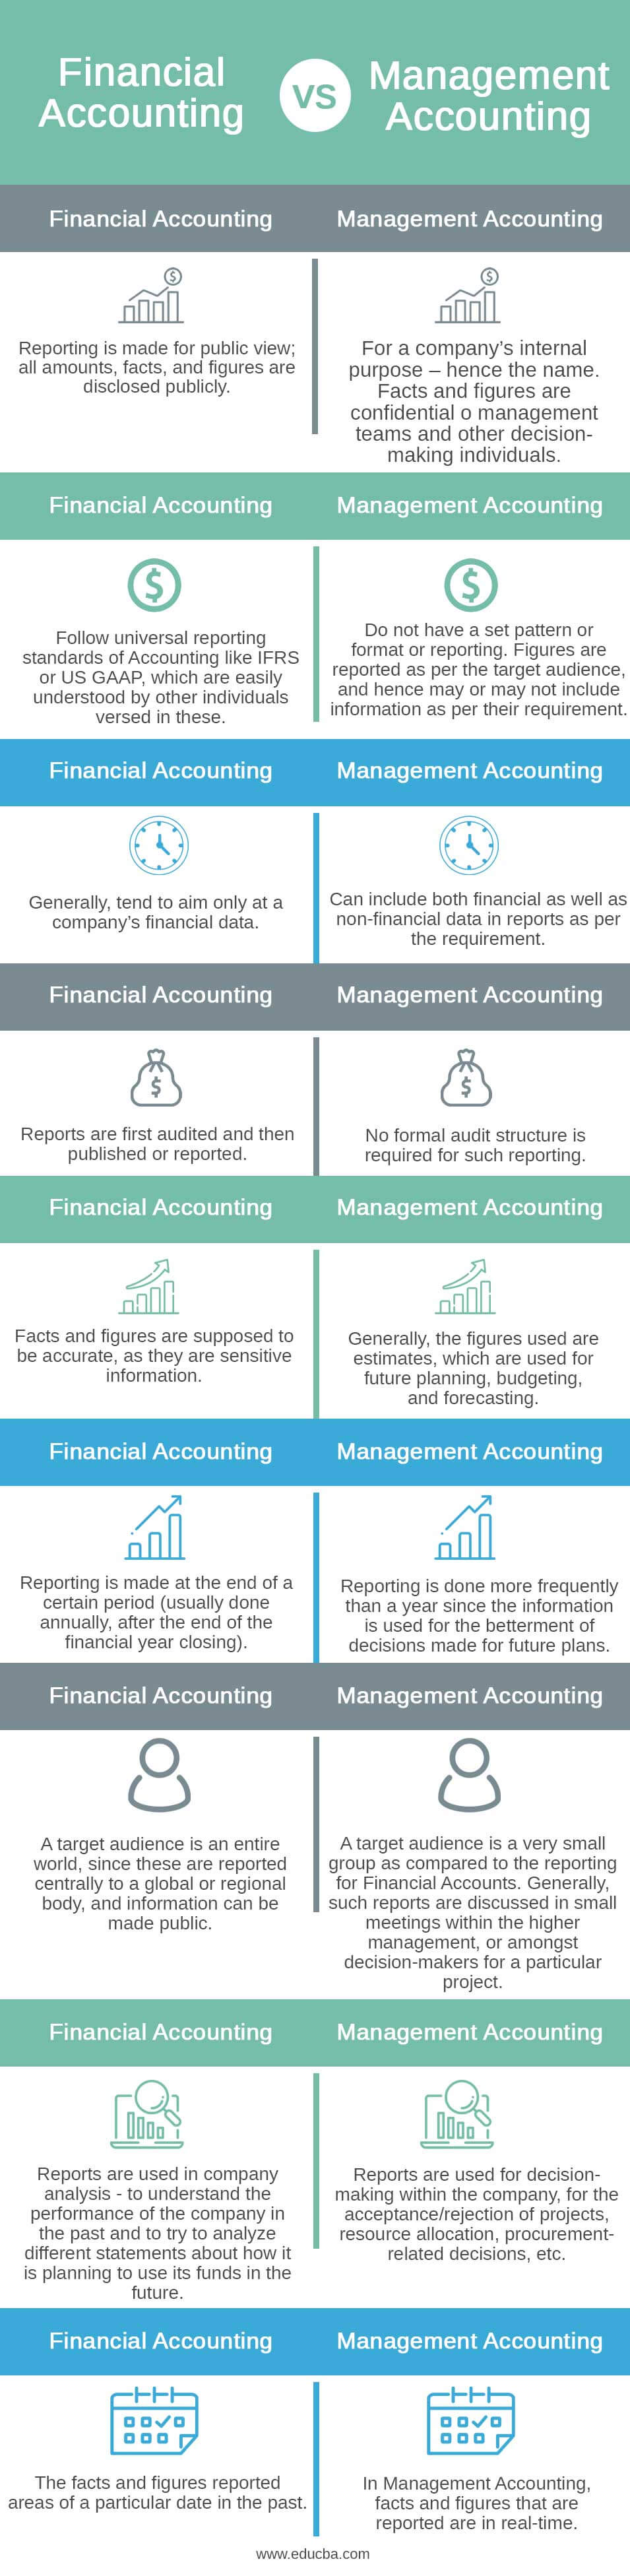 Financial Accounting vs Management Accounting info